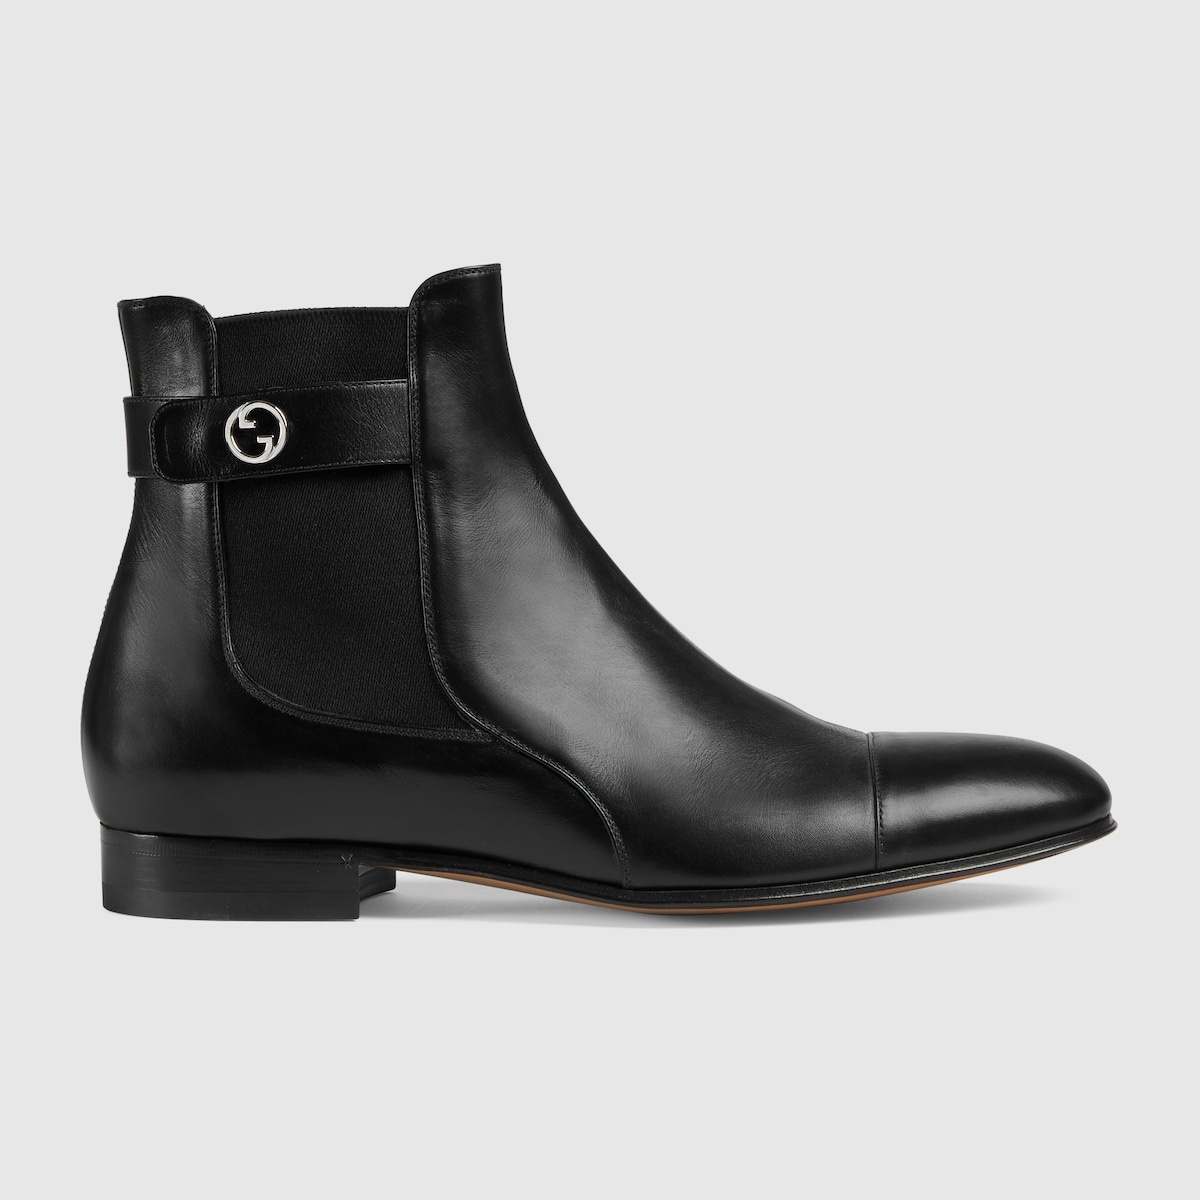 Men's Gucci Blondie ankle boot - 1